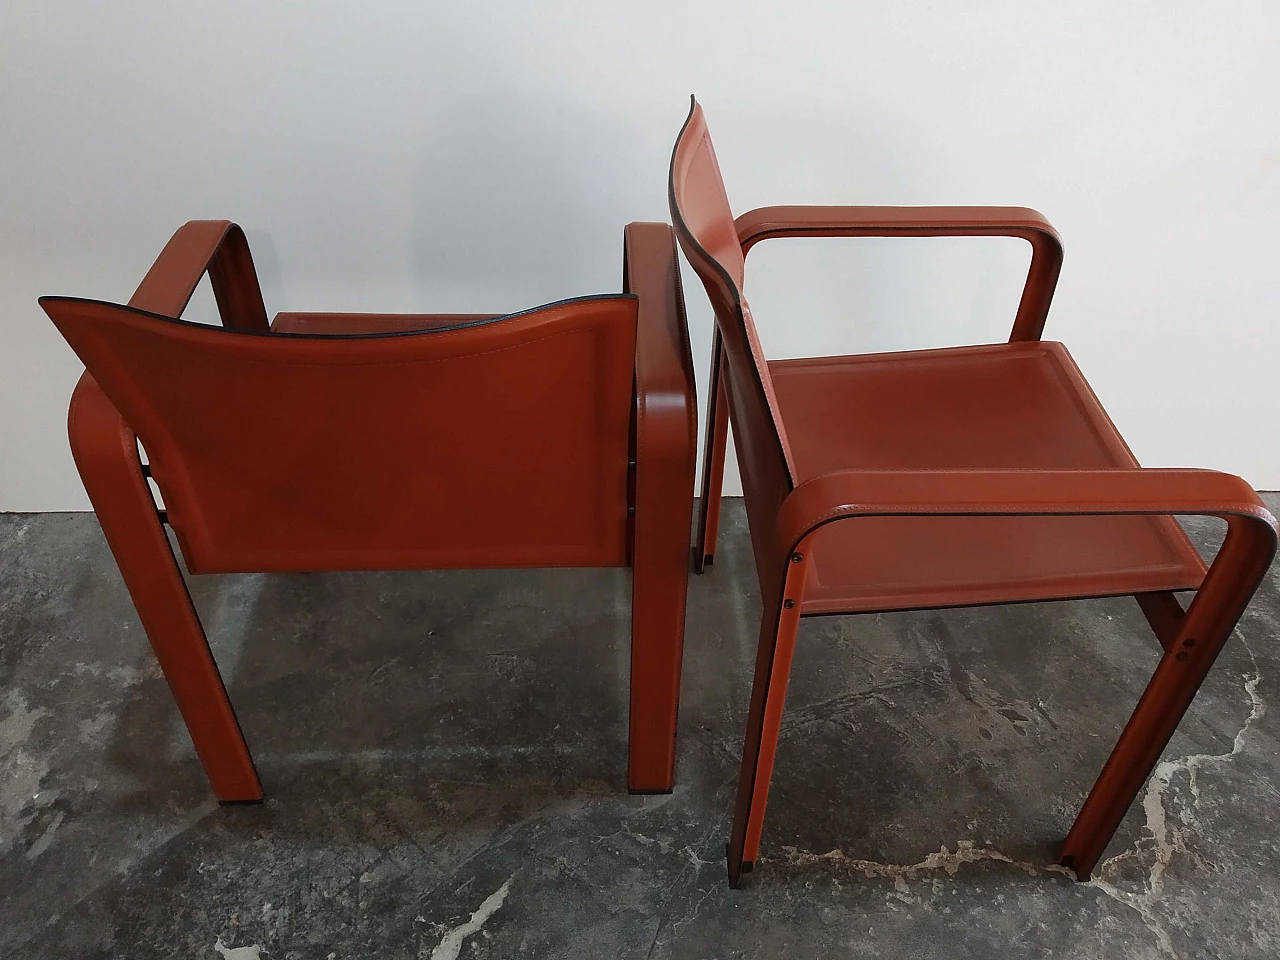 Pair of Golfo dei Poeti chairs by Toussaint & Angeloni manufactured by Matteo Grassi, 1980s 17